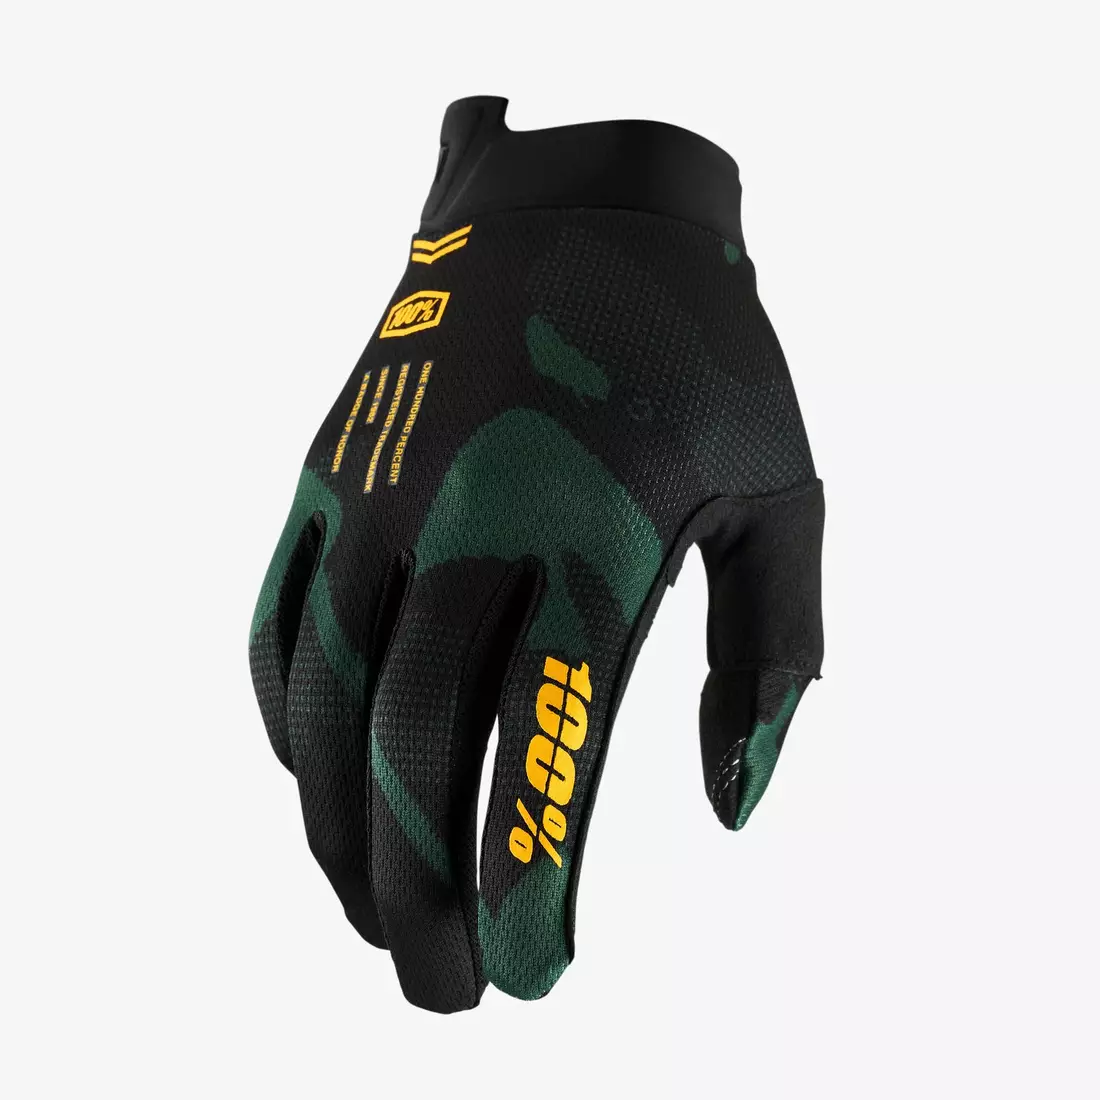 100% ITRACK Children's cycling gloves, black and yellow